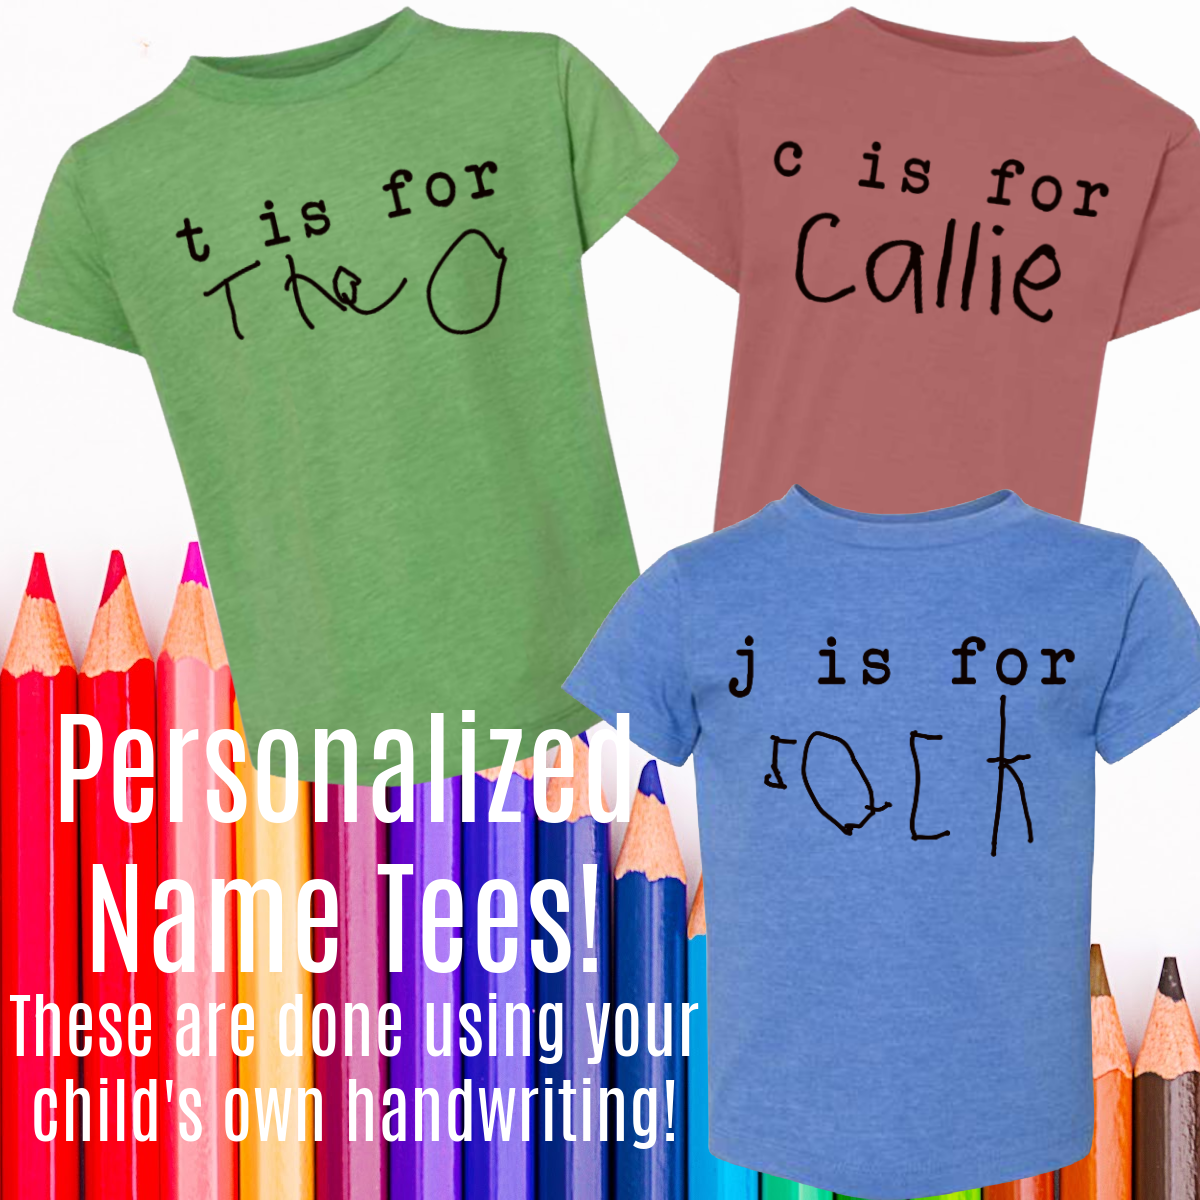 Personalized Back To School Name Tees - Use Your Child's Own Handwriting!